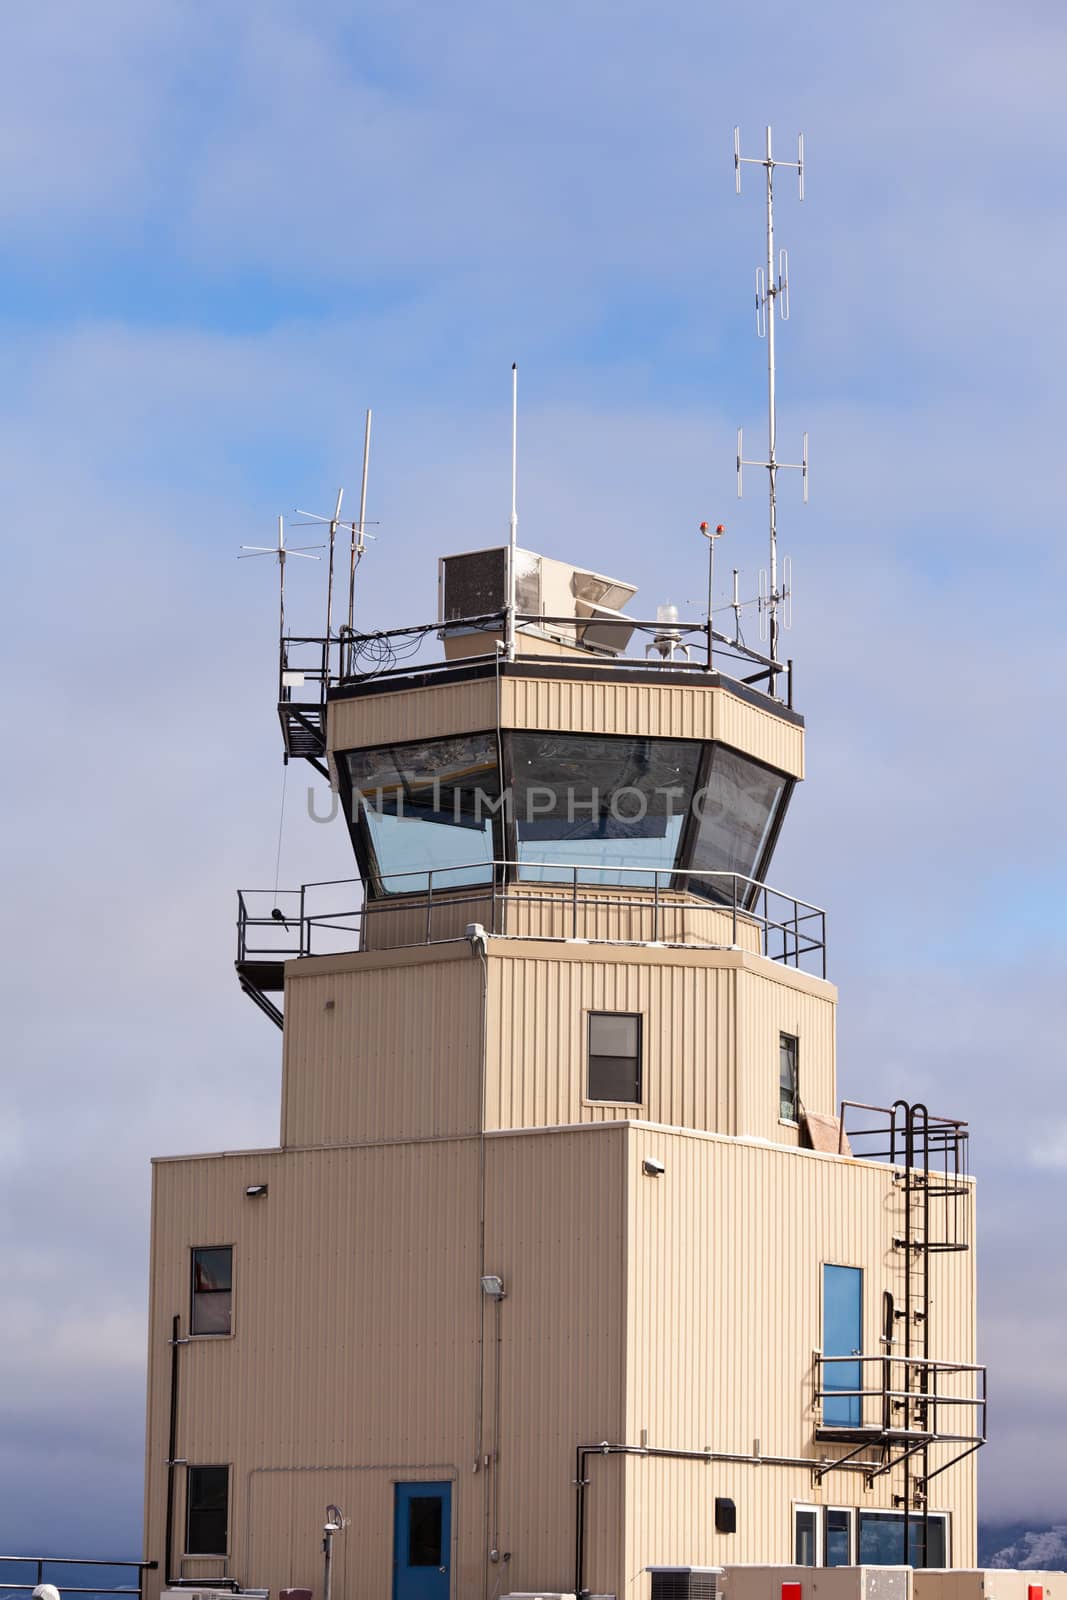 Small airport air traffic control tower with huge glass windows and antennas mounted on roof